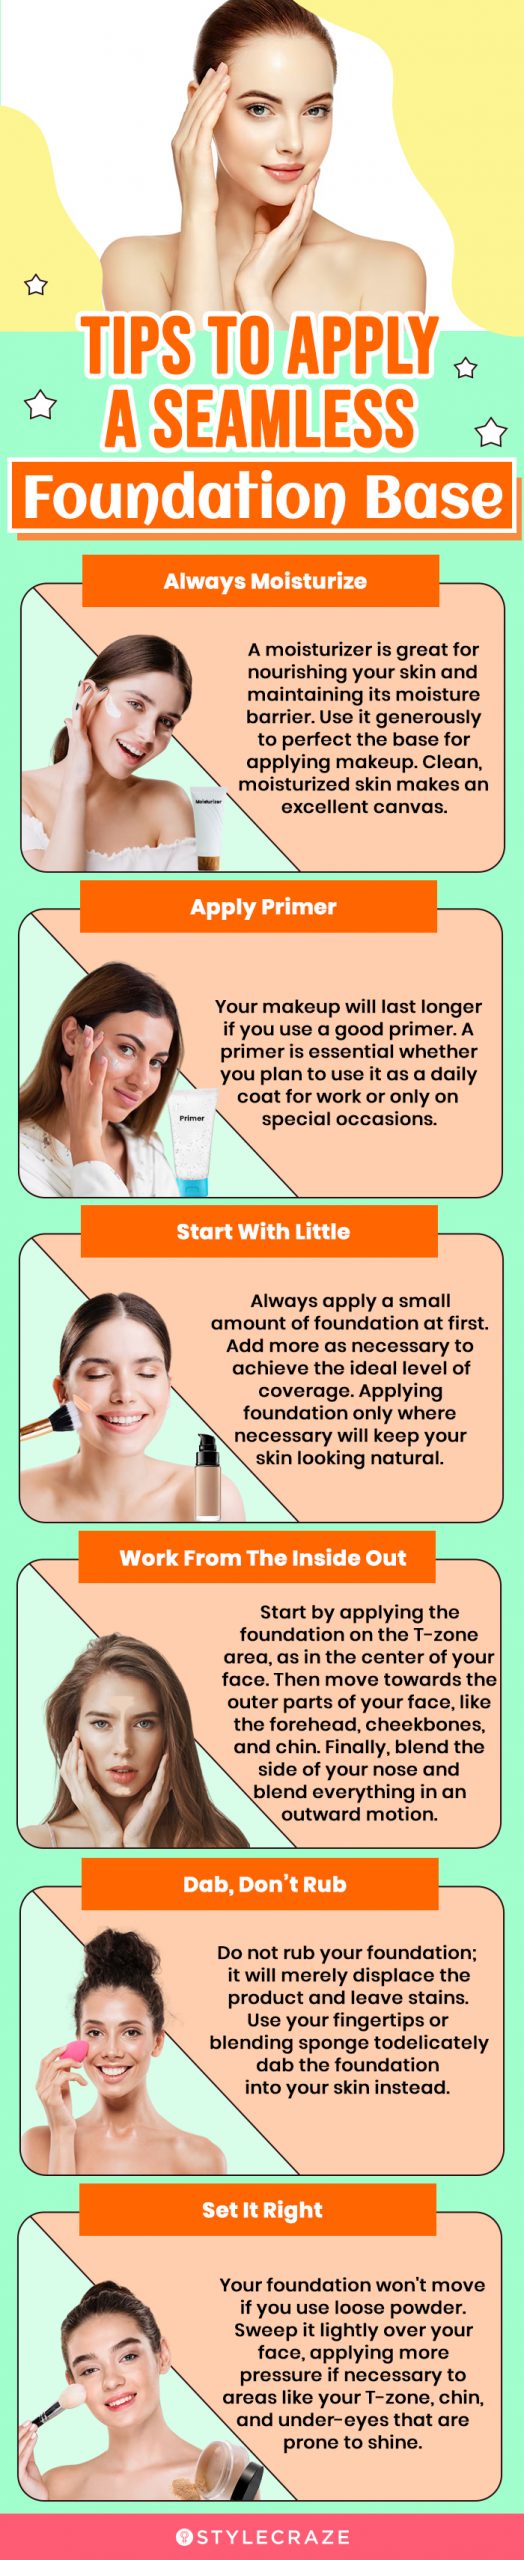 Tips To Apply A Seamless Foundation Base (infographic)